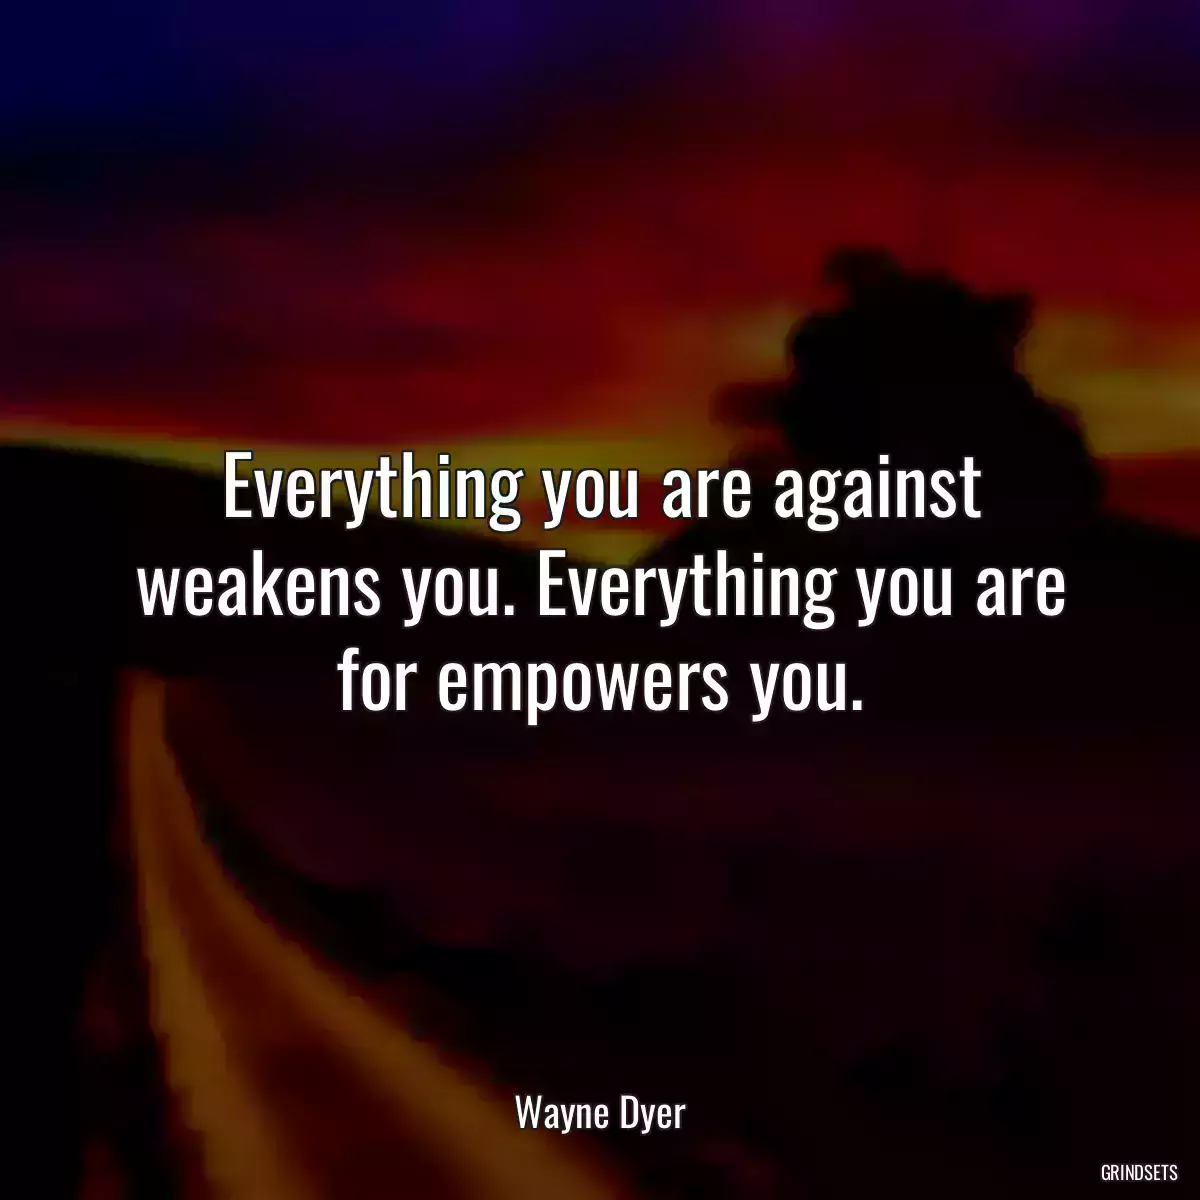 Everything you are against weakens you. Everything you are for empowers you.